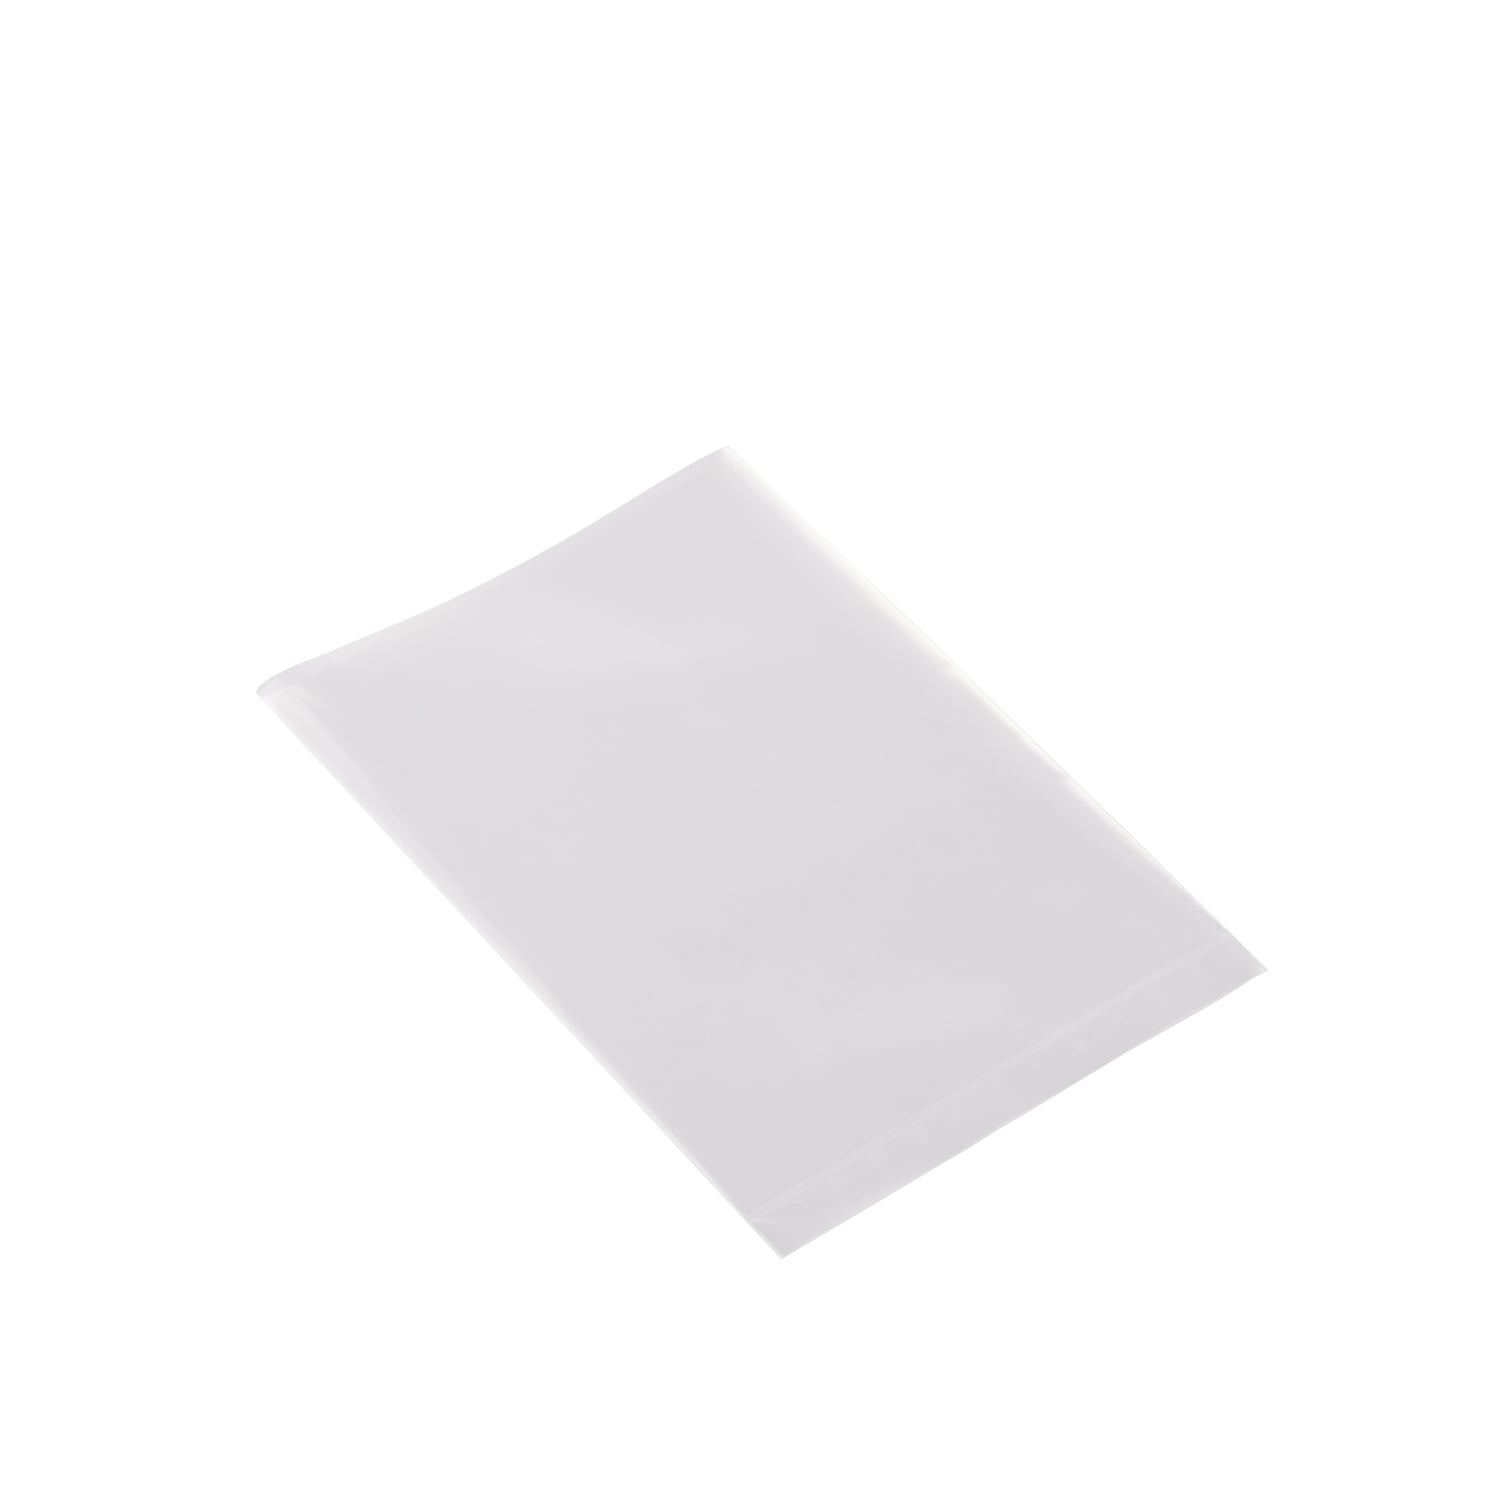 1000 8x10 SELF SEAL FLAP TAPE CLEAR UNEEKMAILERS POLY BAGS POLYPROPYLENE OPP BAGS 1.5 MIL